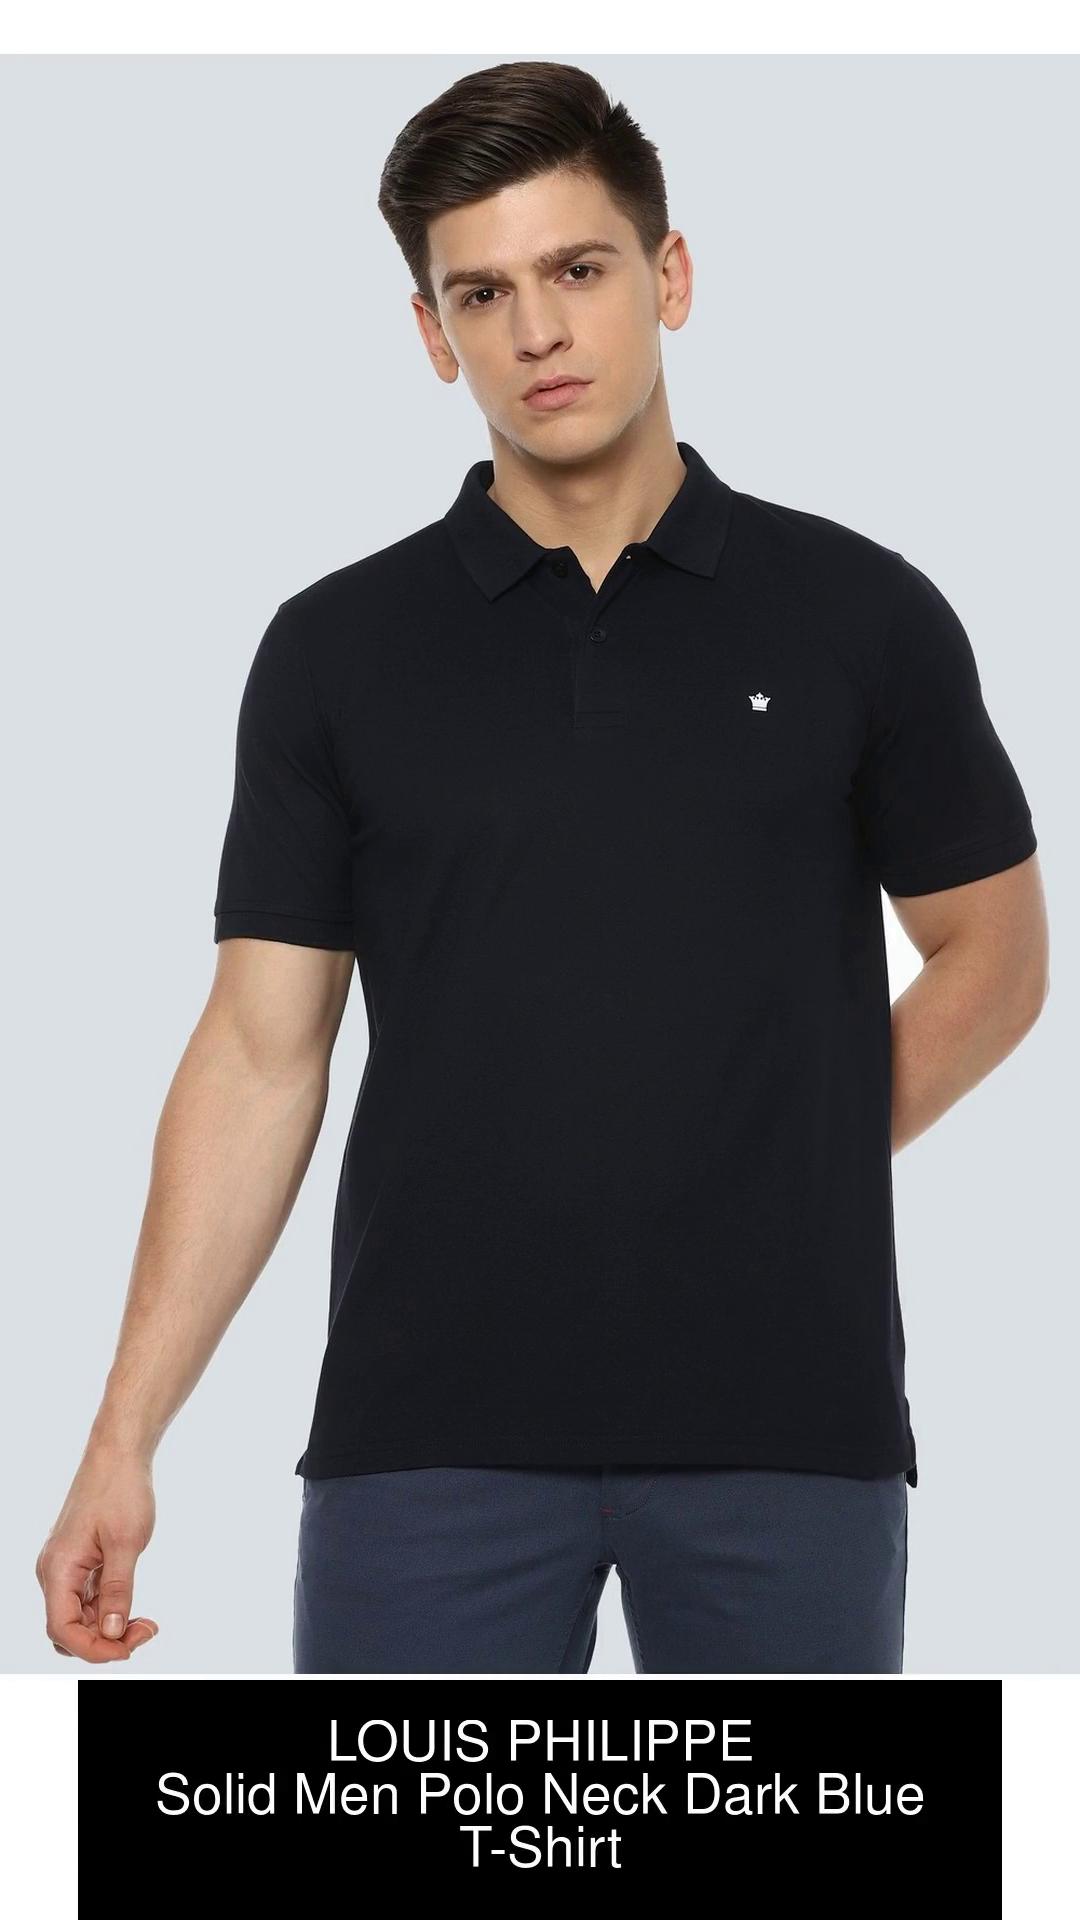 LOUIS PHILIPPE Solid Men Polo Neck Navy Blue T-Shirt - Price History